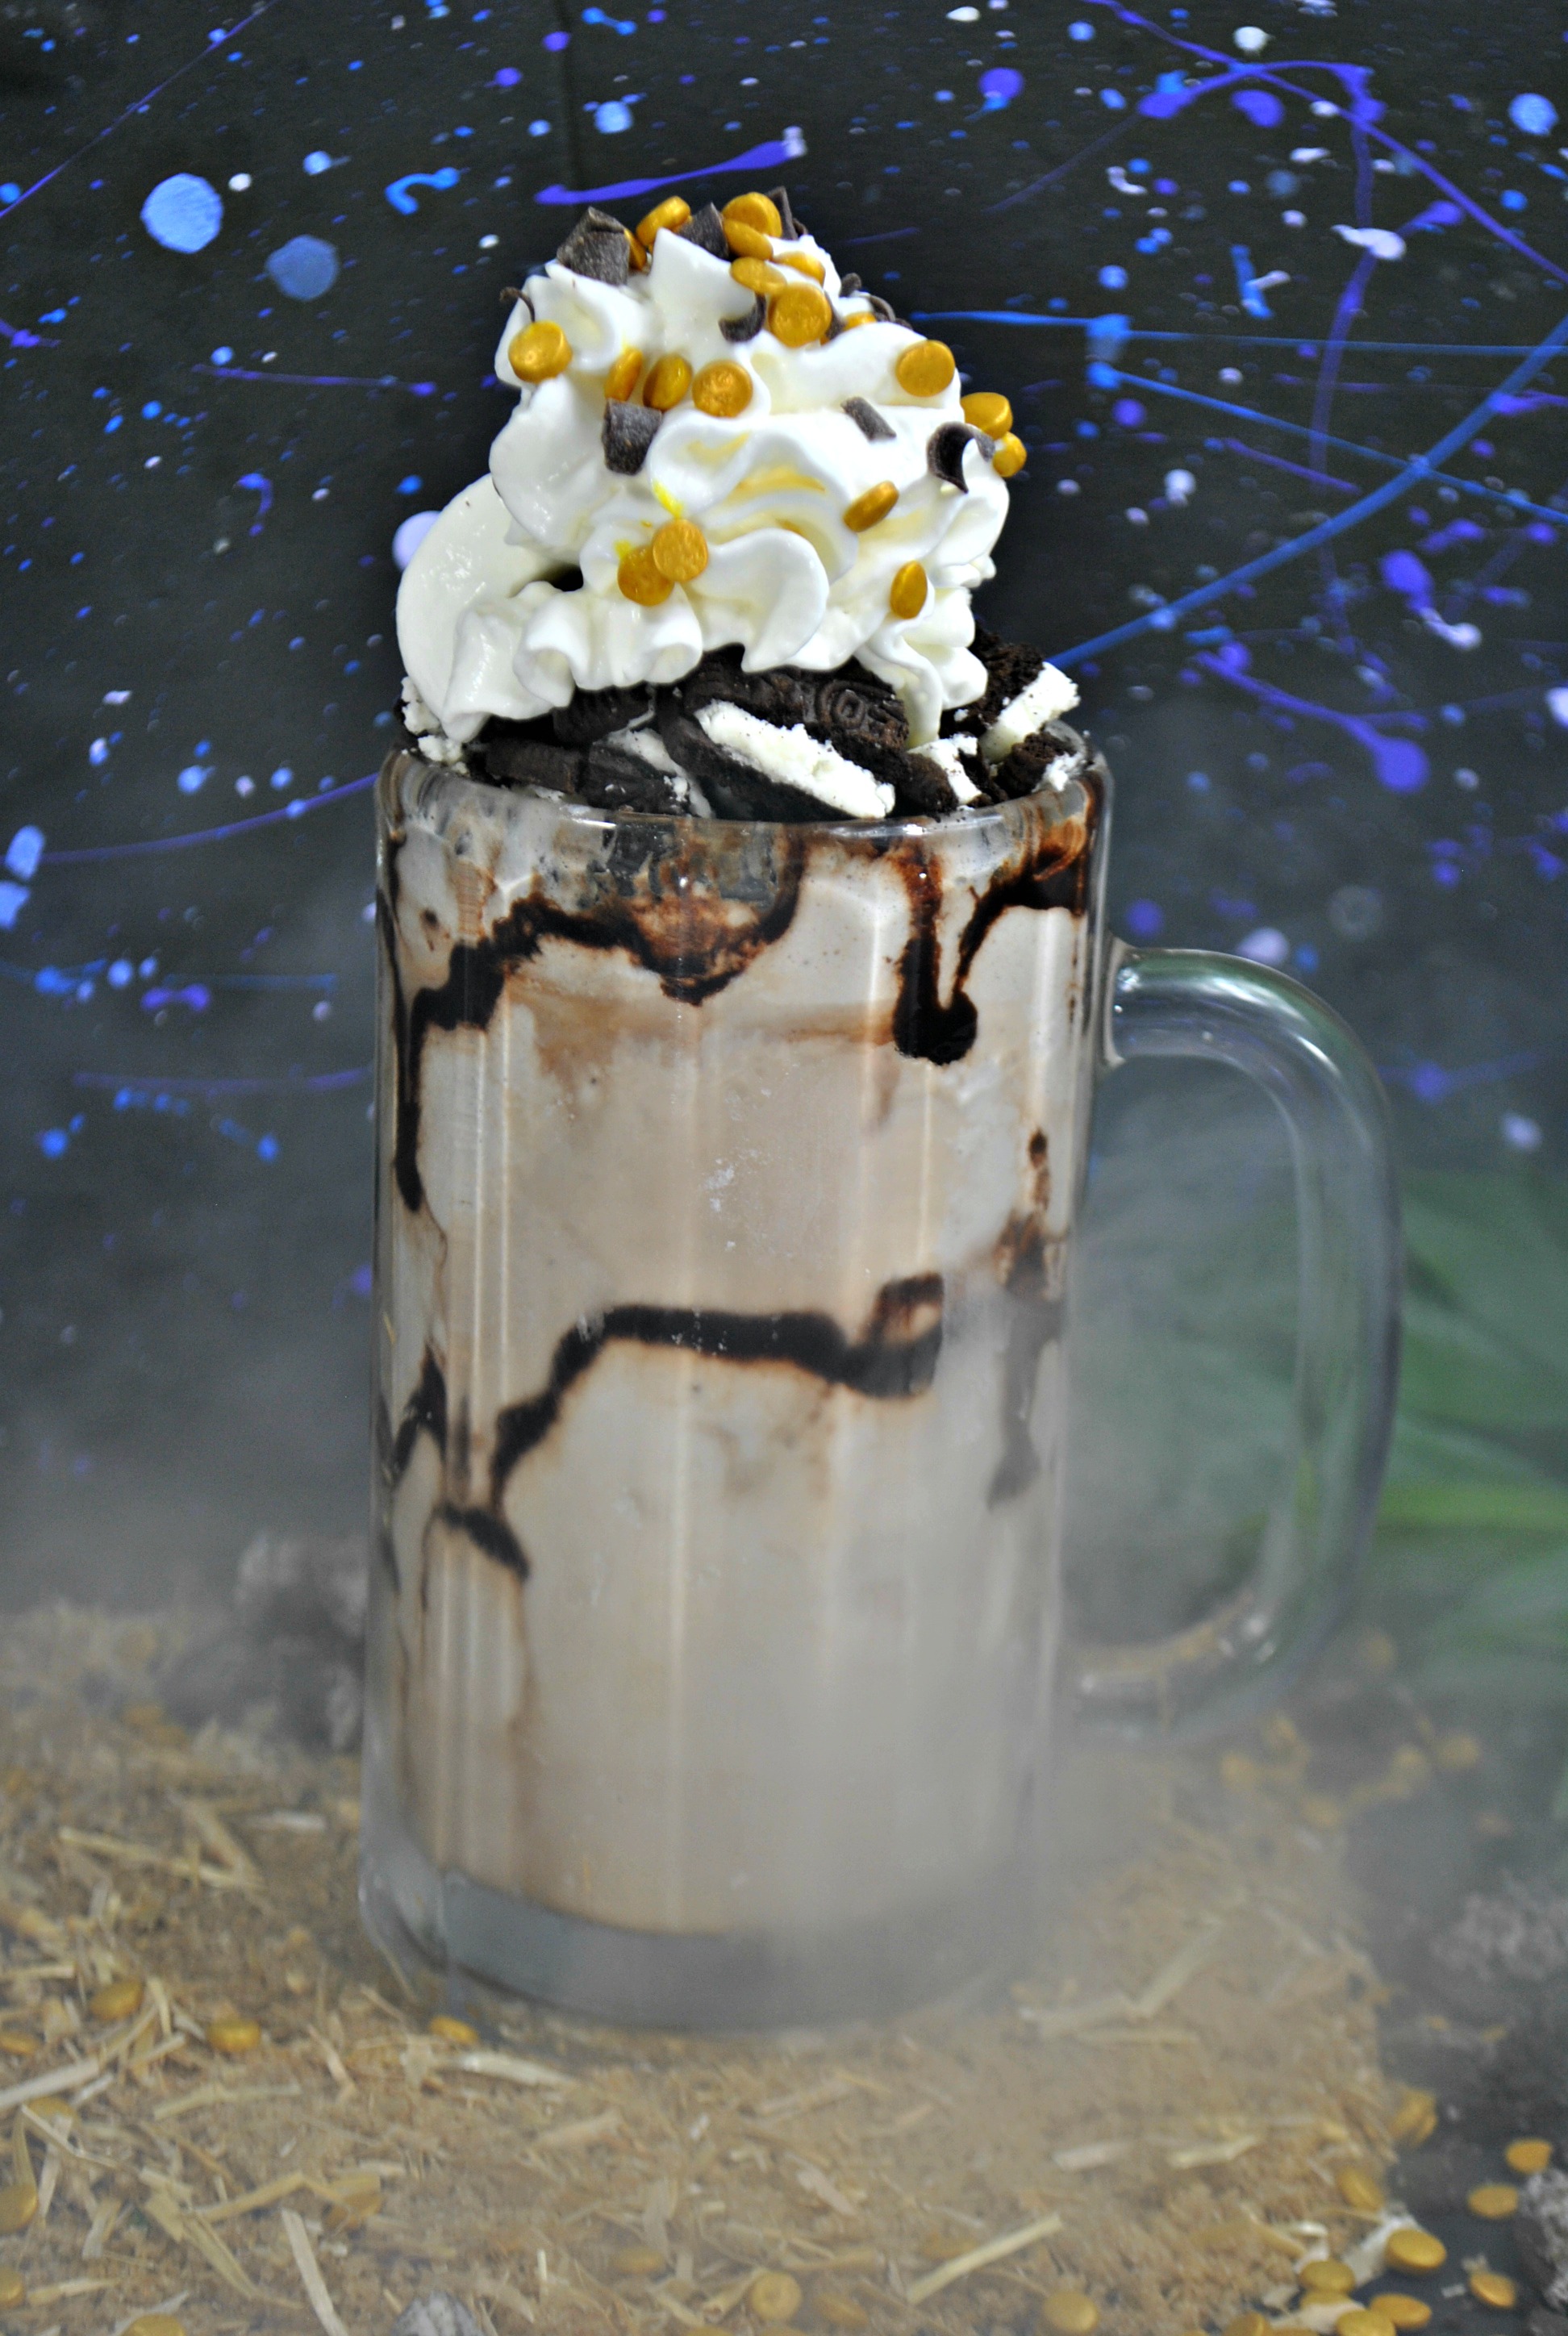 Han Solo Inspired Shake From "Solo" A Star Wars Story